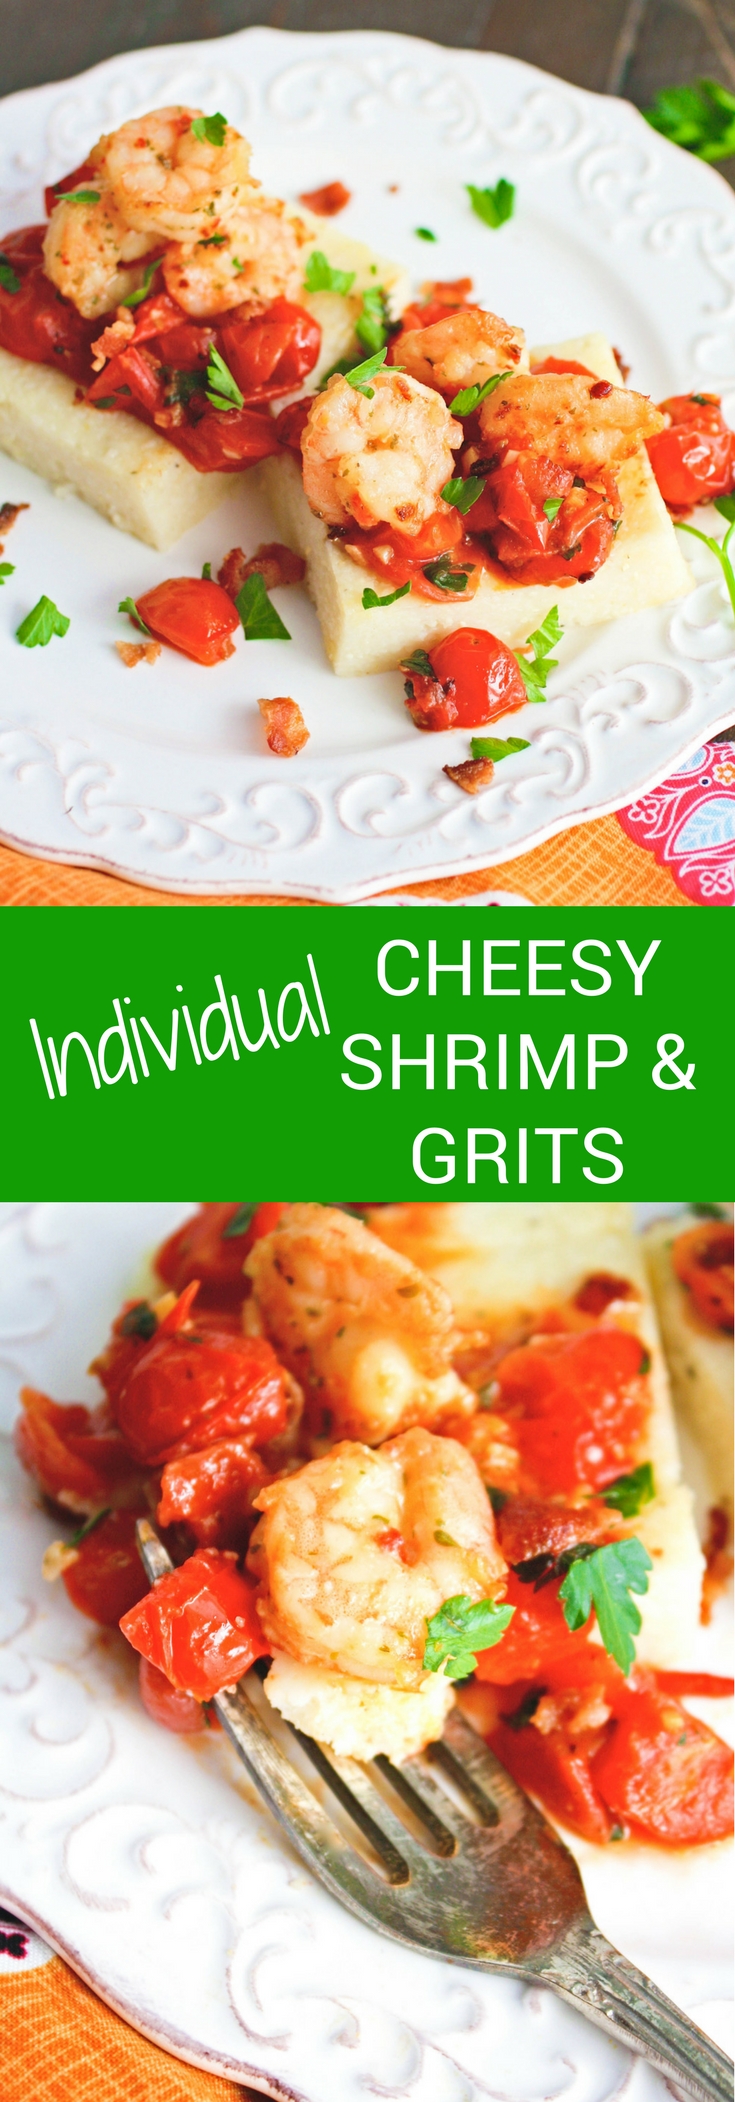 Individual Cheesy Shrimp & Grits are perfect as an appetizer or lighter meal. You'll love these Individual Cheesy Shrimp & Grits any time!